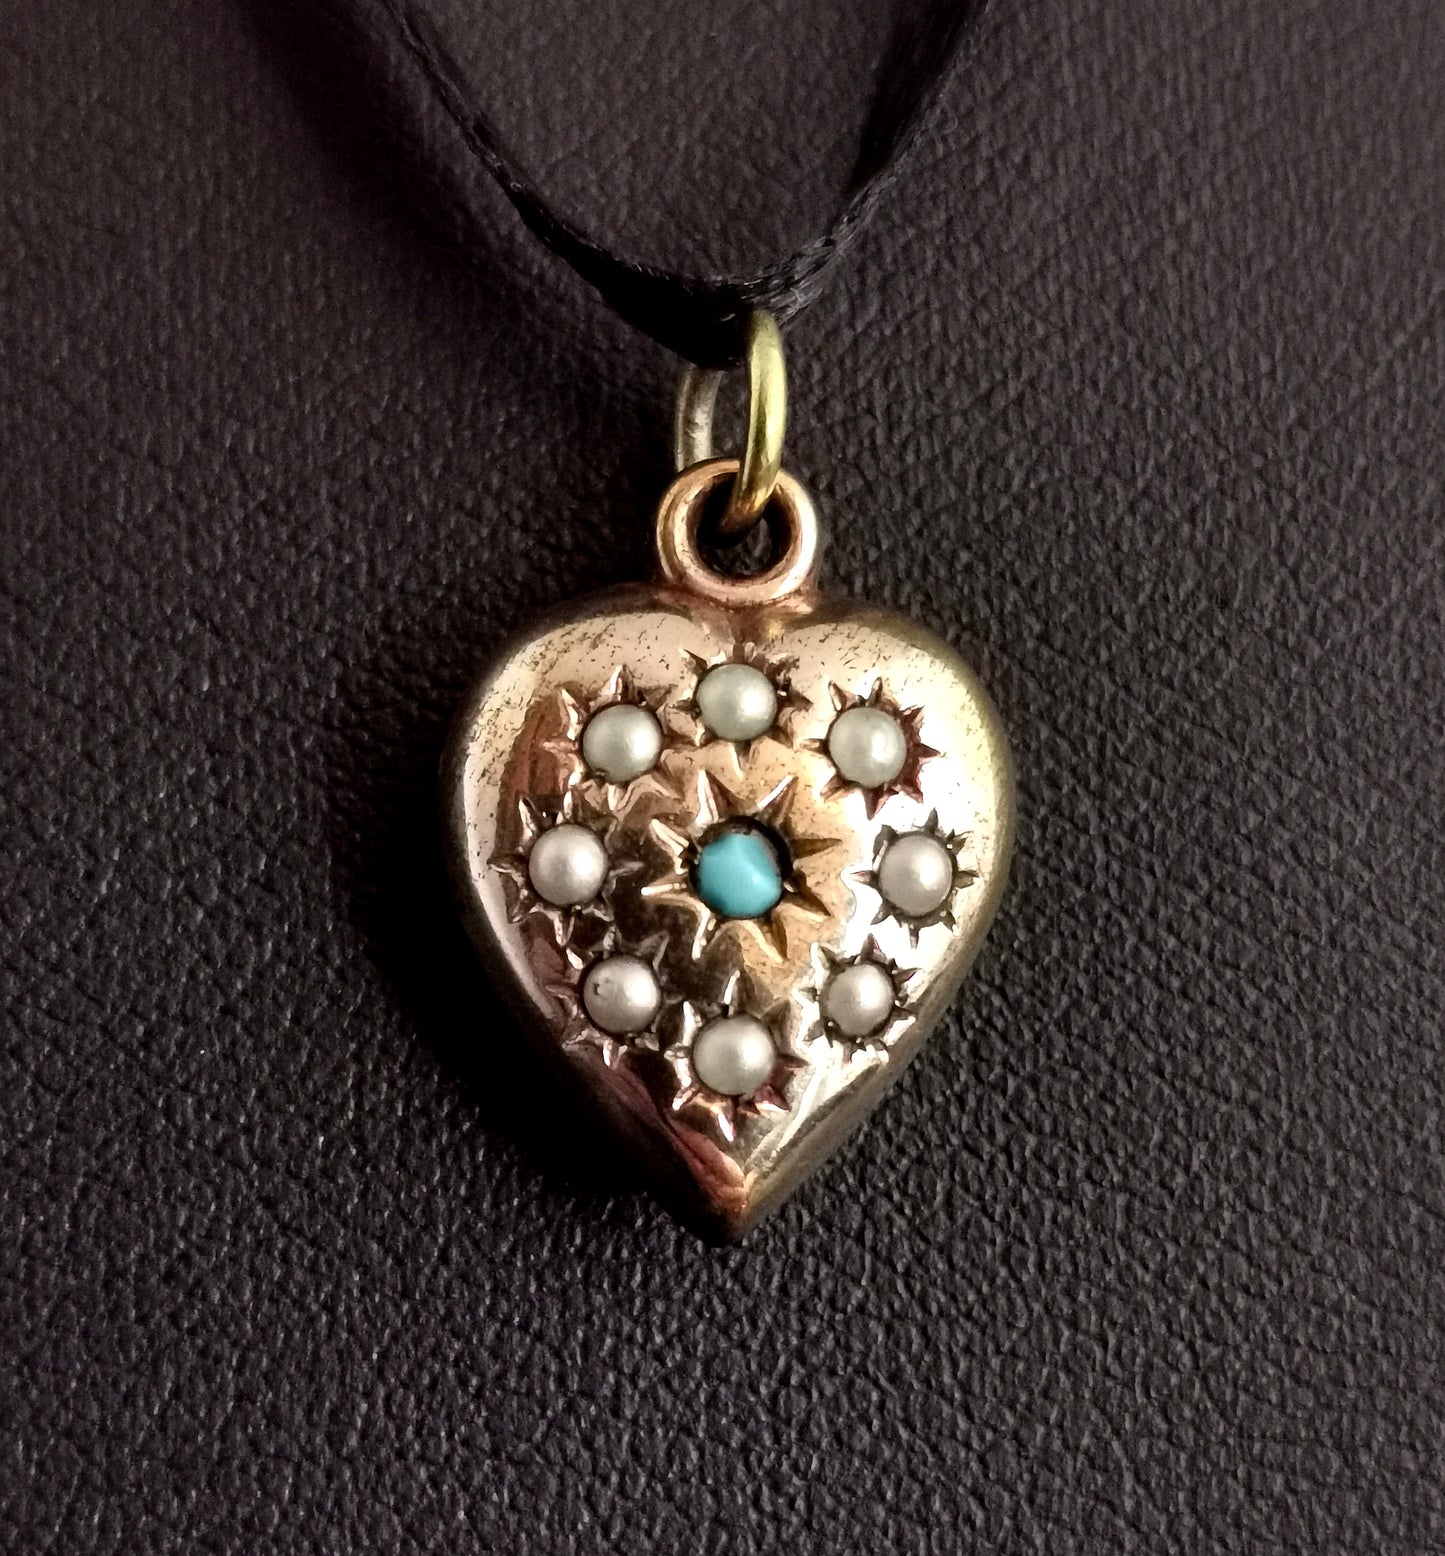 Antique puffy heart pendant, seed pearl and turquoise, gold plated